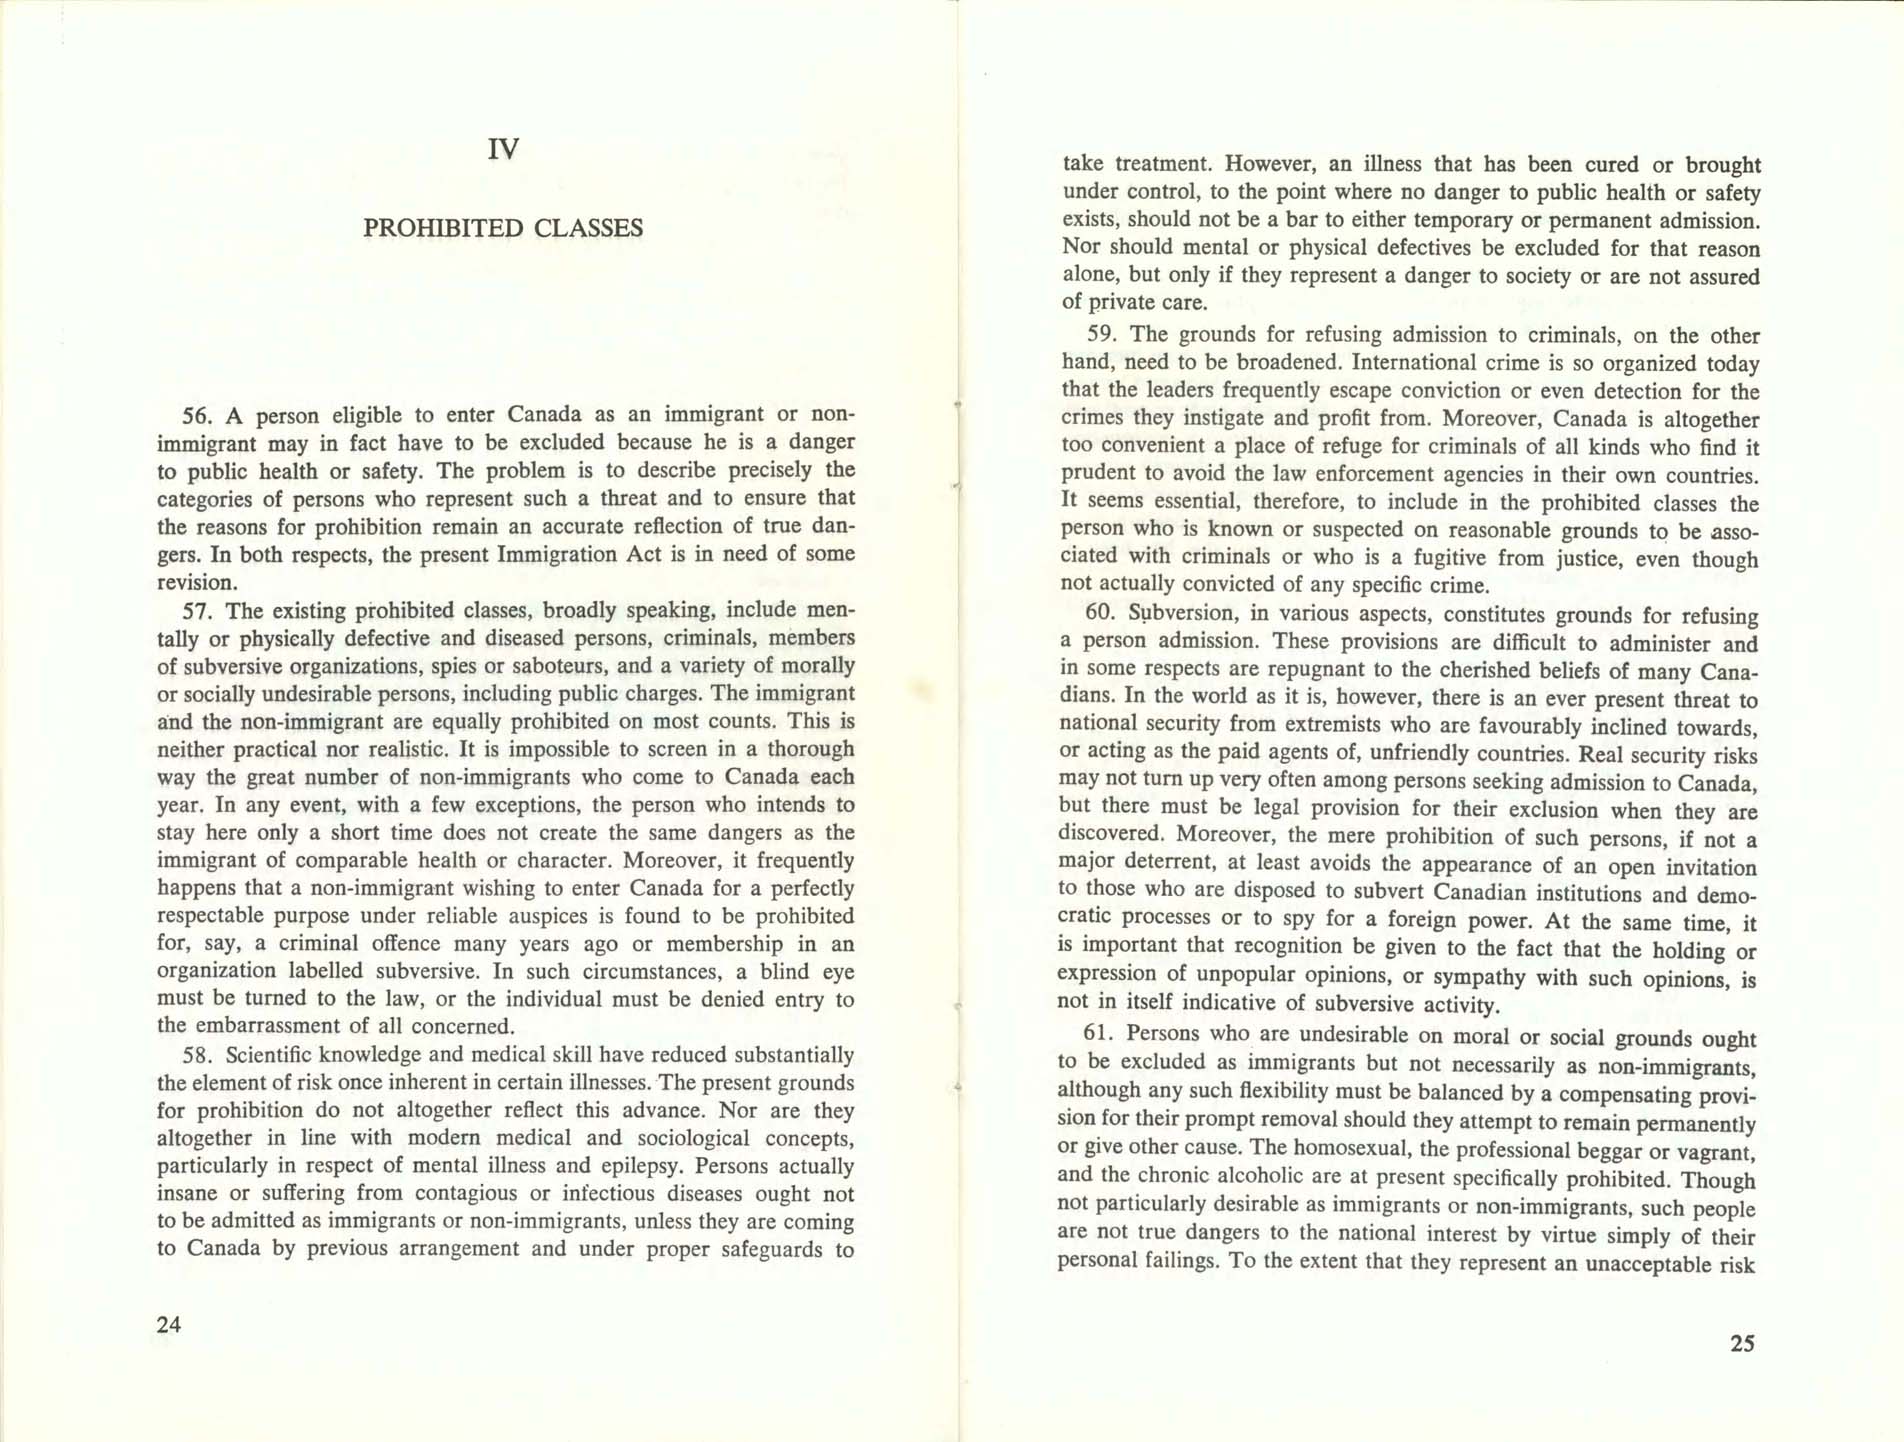 Page 24, 25 White Paper on Immigration, 1966